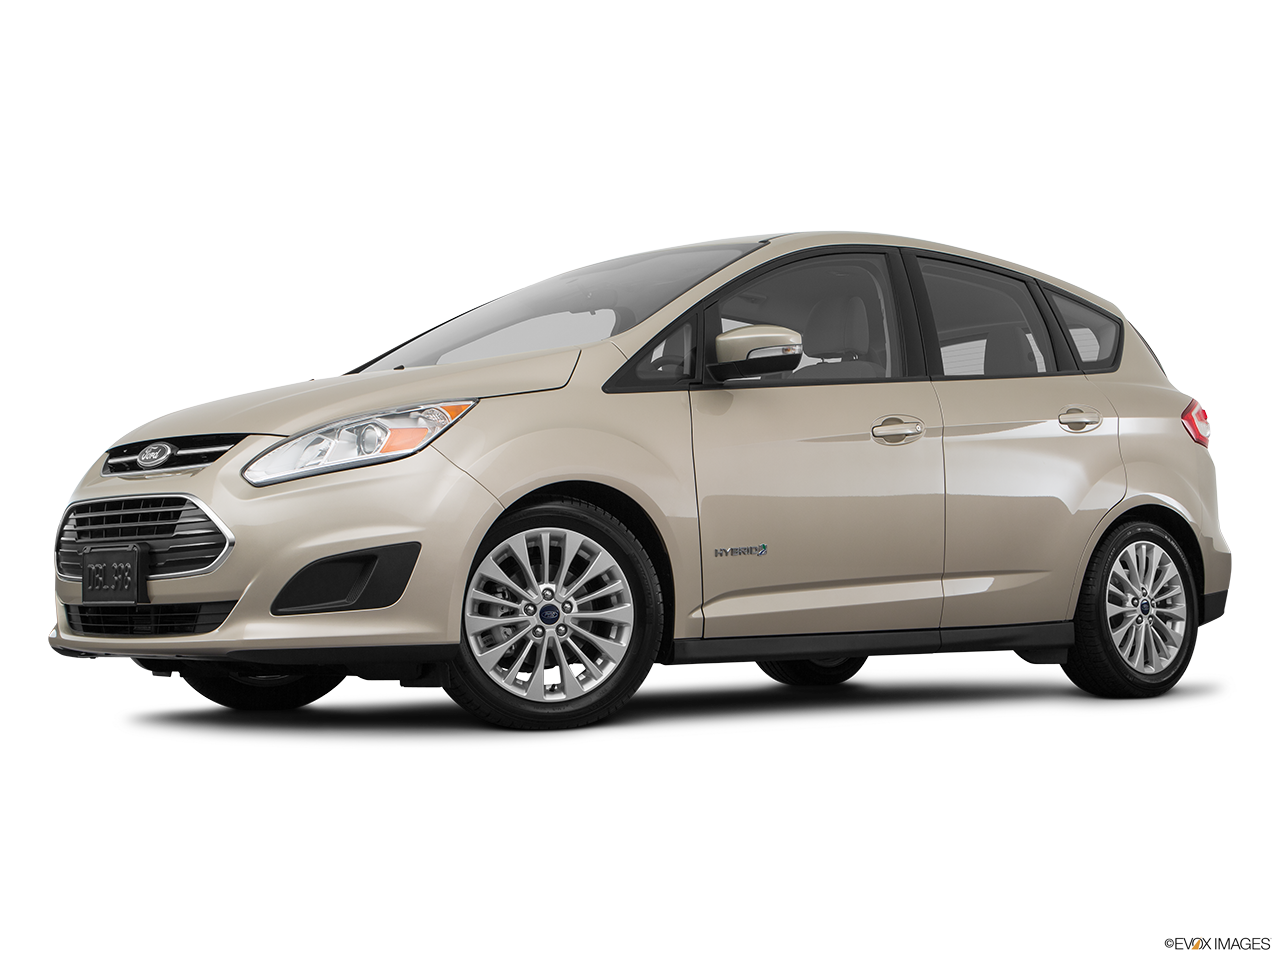 Explore Ford C Max Hybrid Review Pricing Features Specs Research Ford Near Me